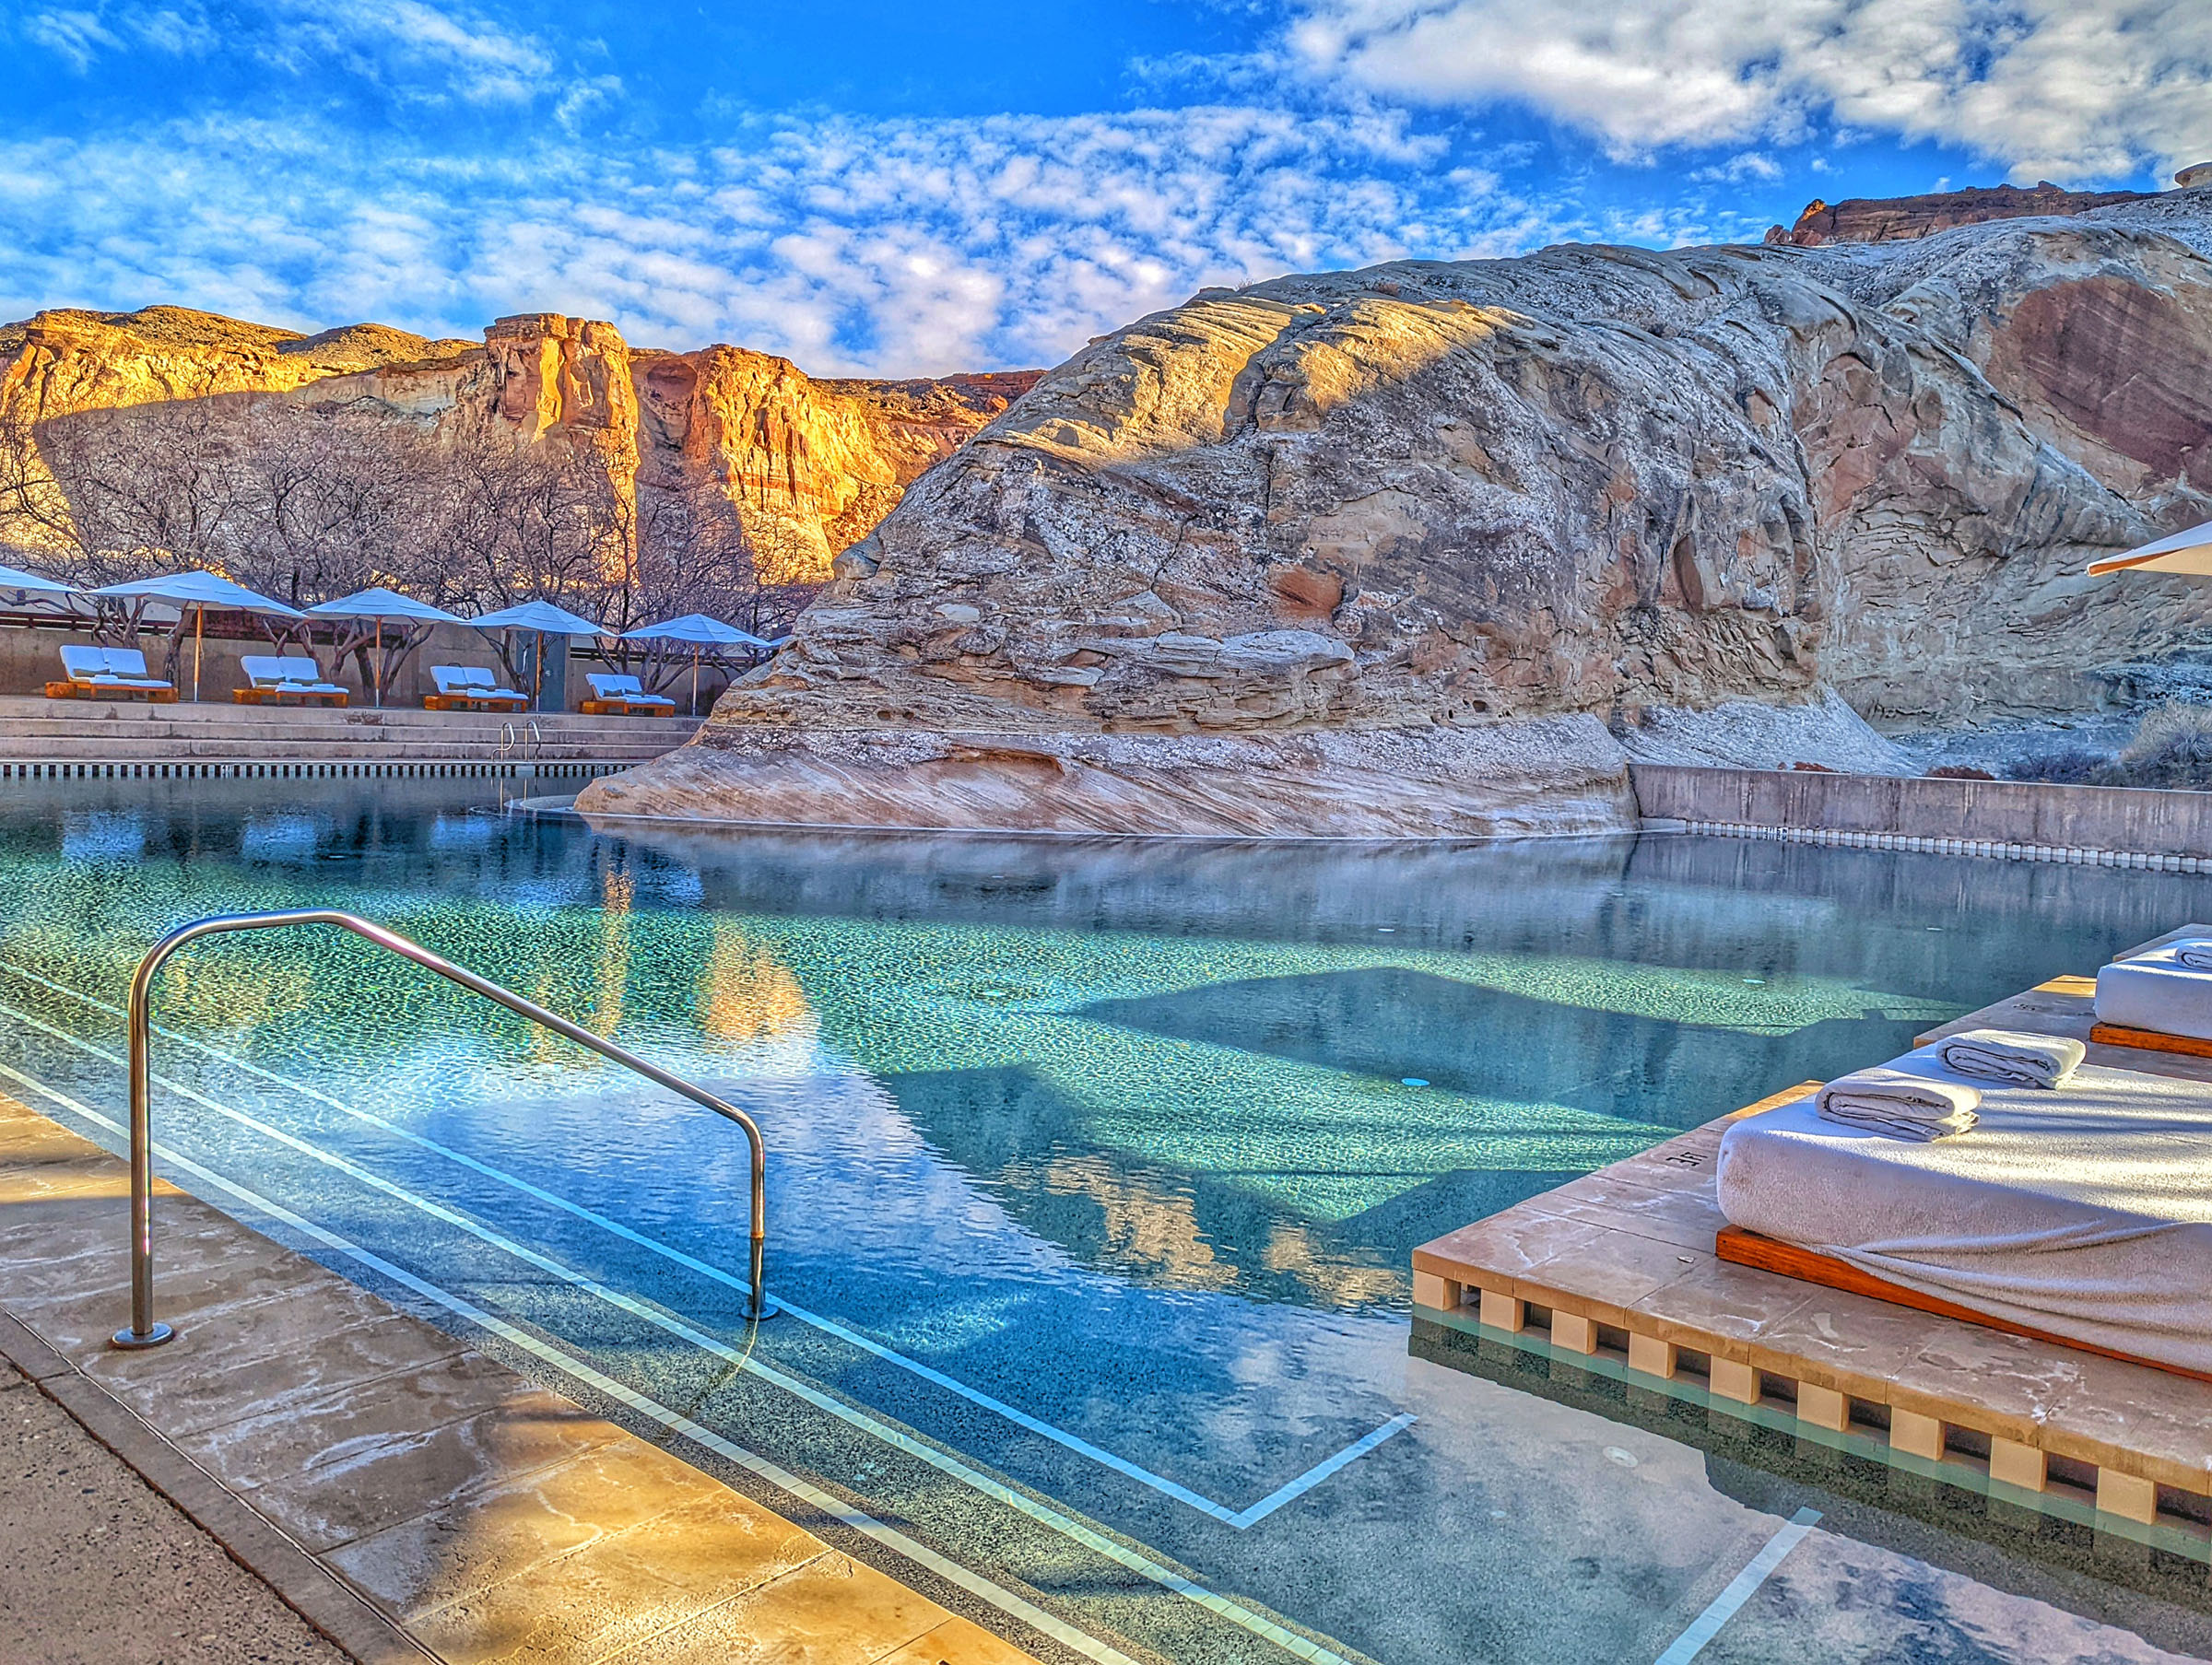 The dramatic swimming pool at Amangiri is built directly into the surrounding sandstone